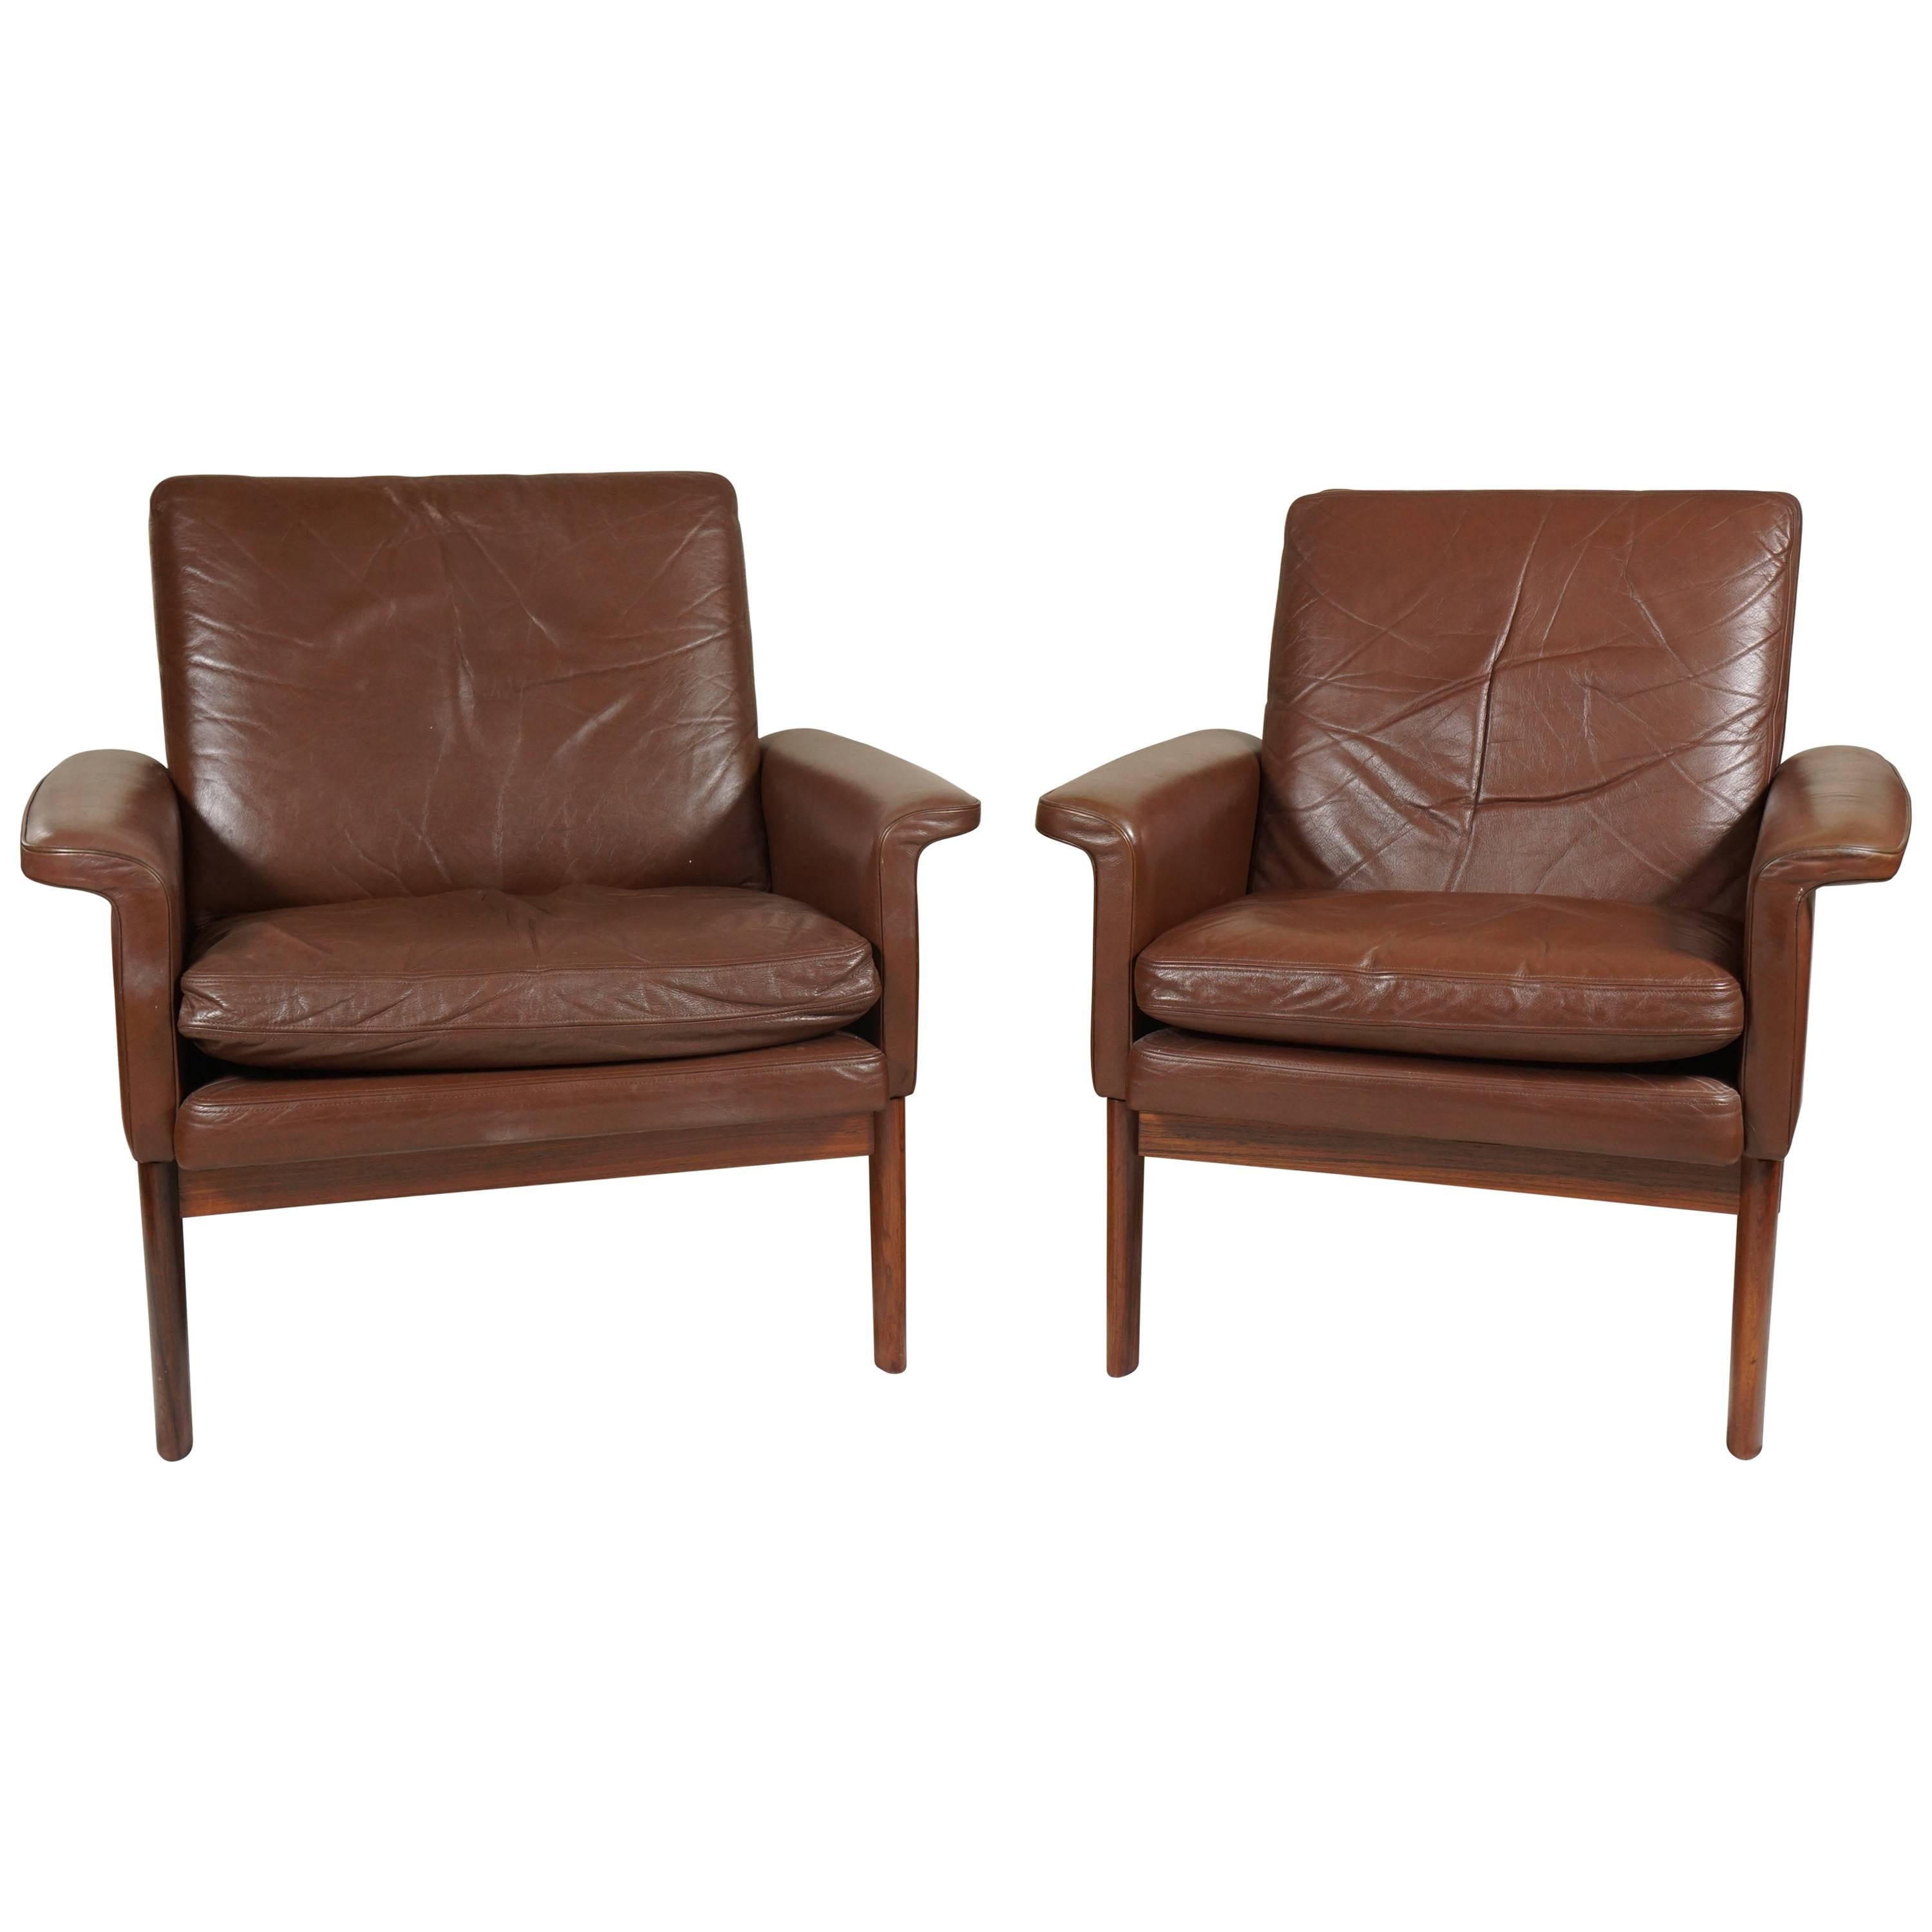 Pair of Leather Armchairs in the Style of Finn Juhl